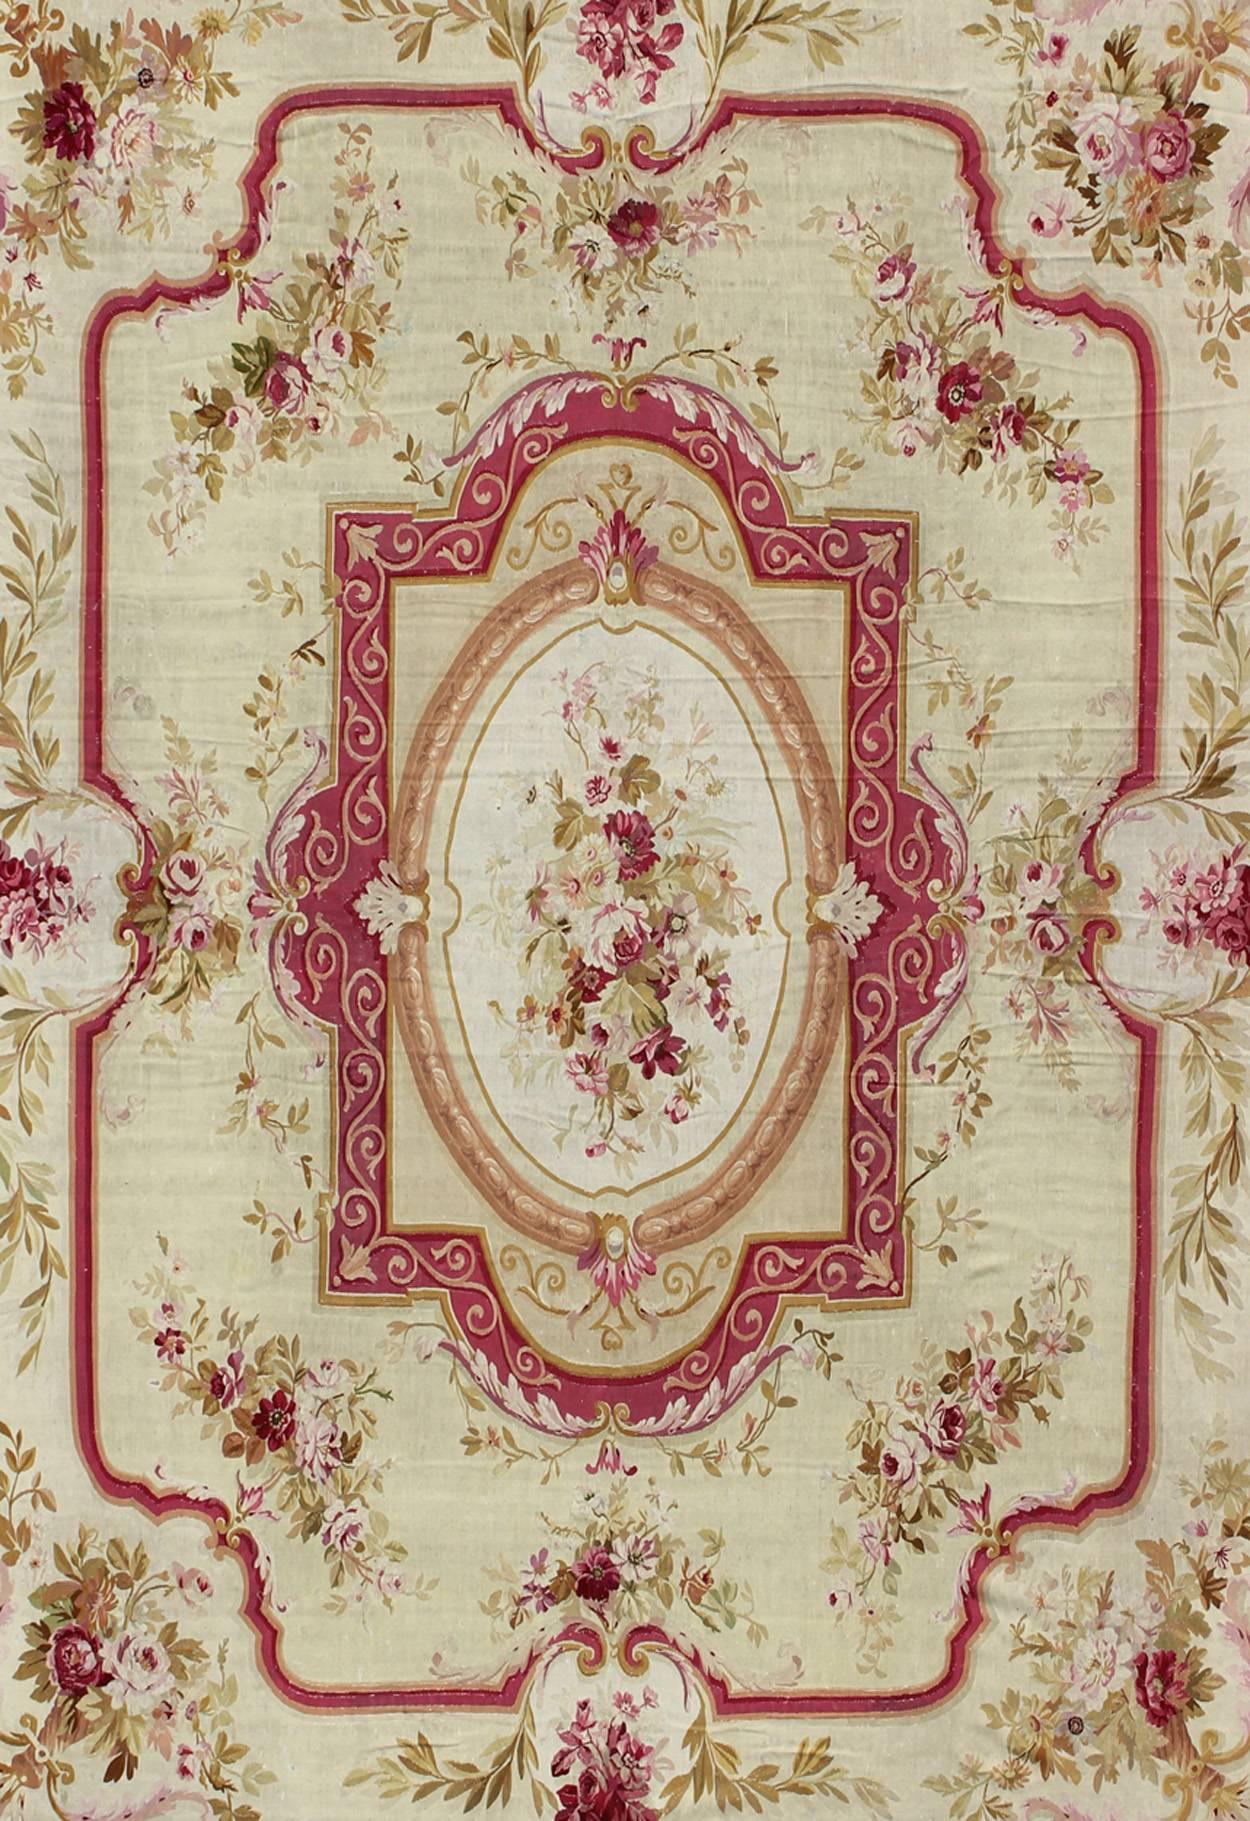 European Antique French Aubusson with Romantic Rose Bouquets in Shades of Red and Pink For Sale